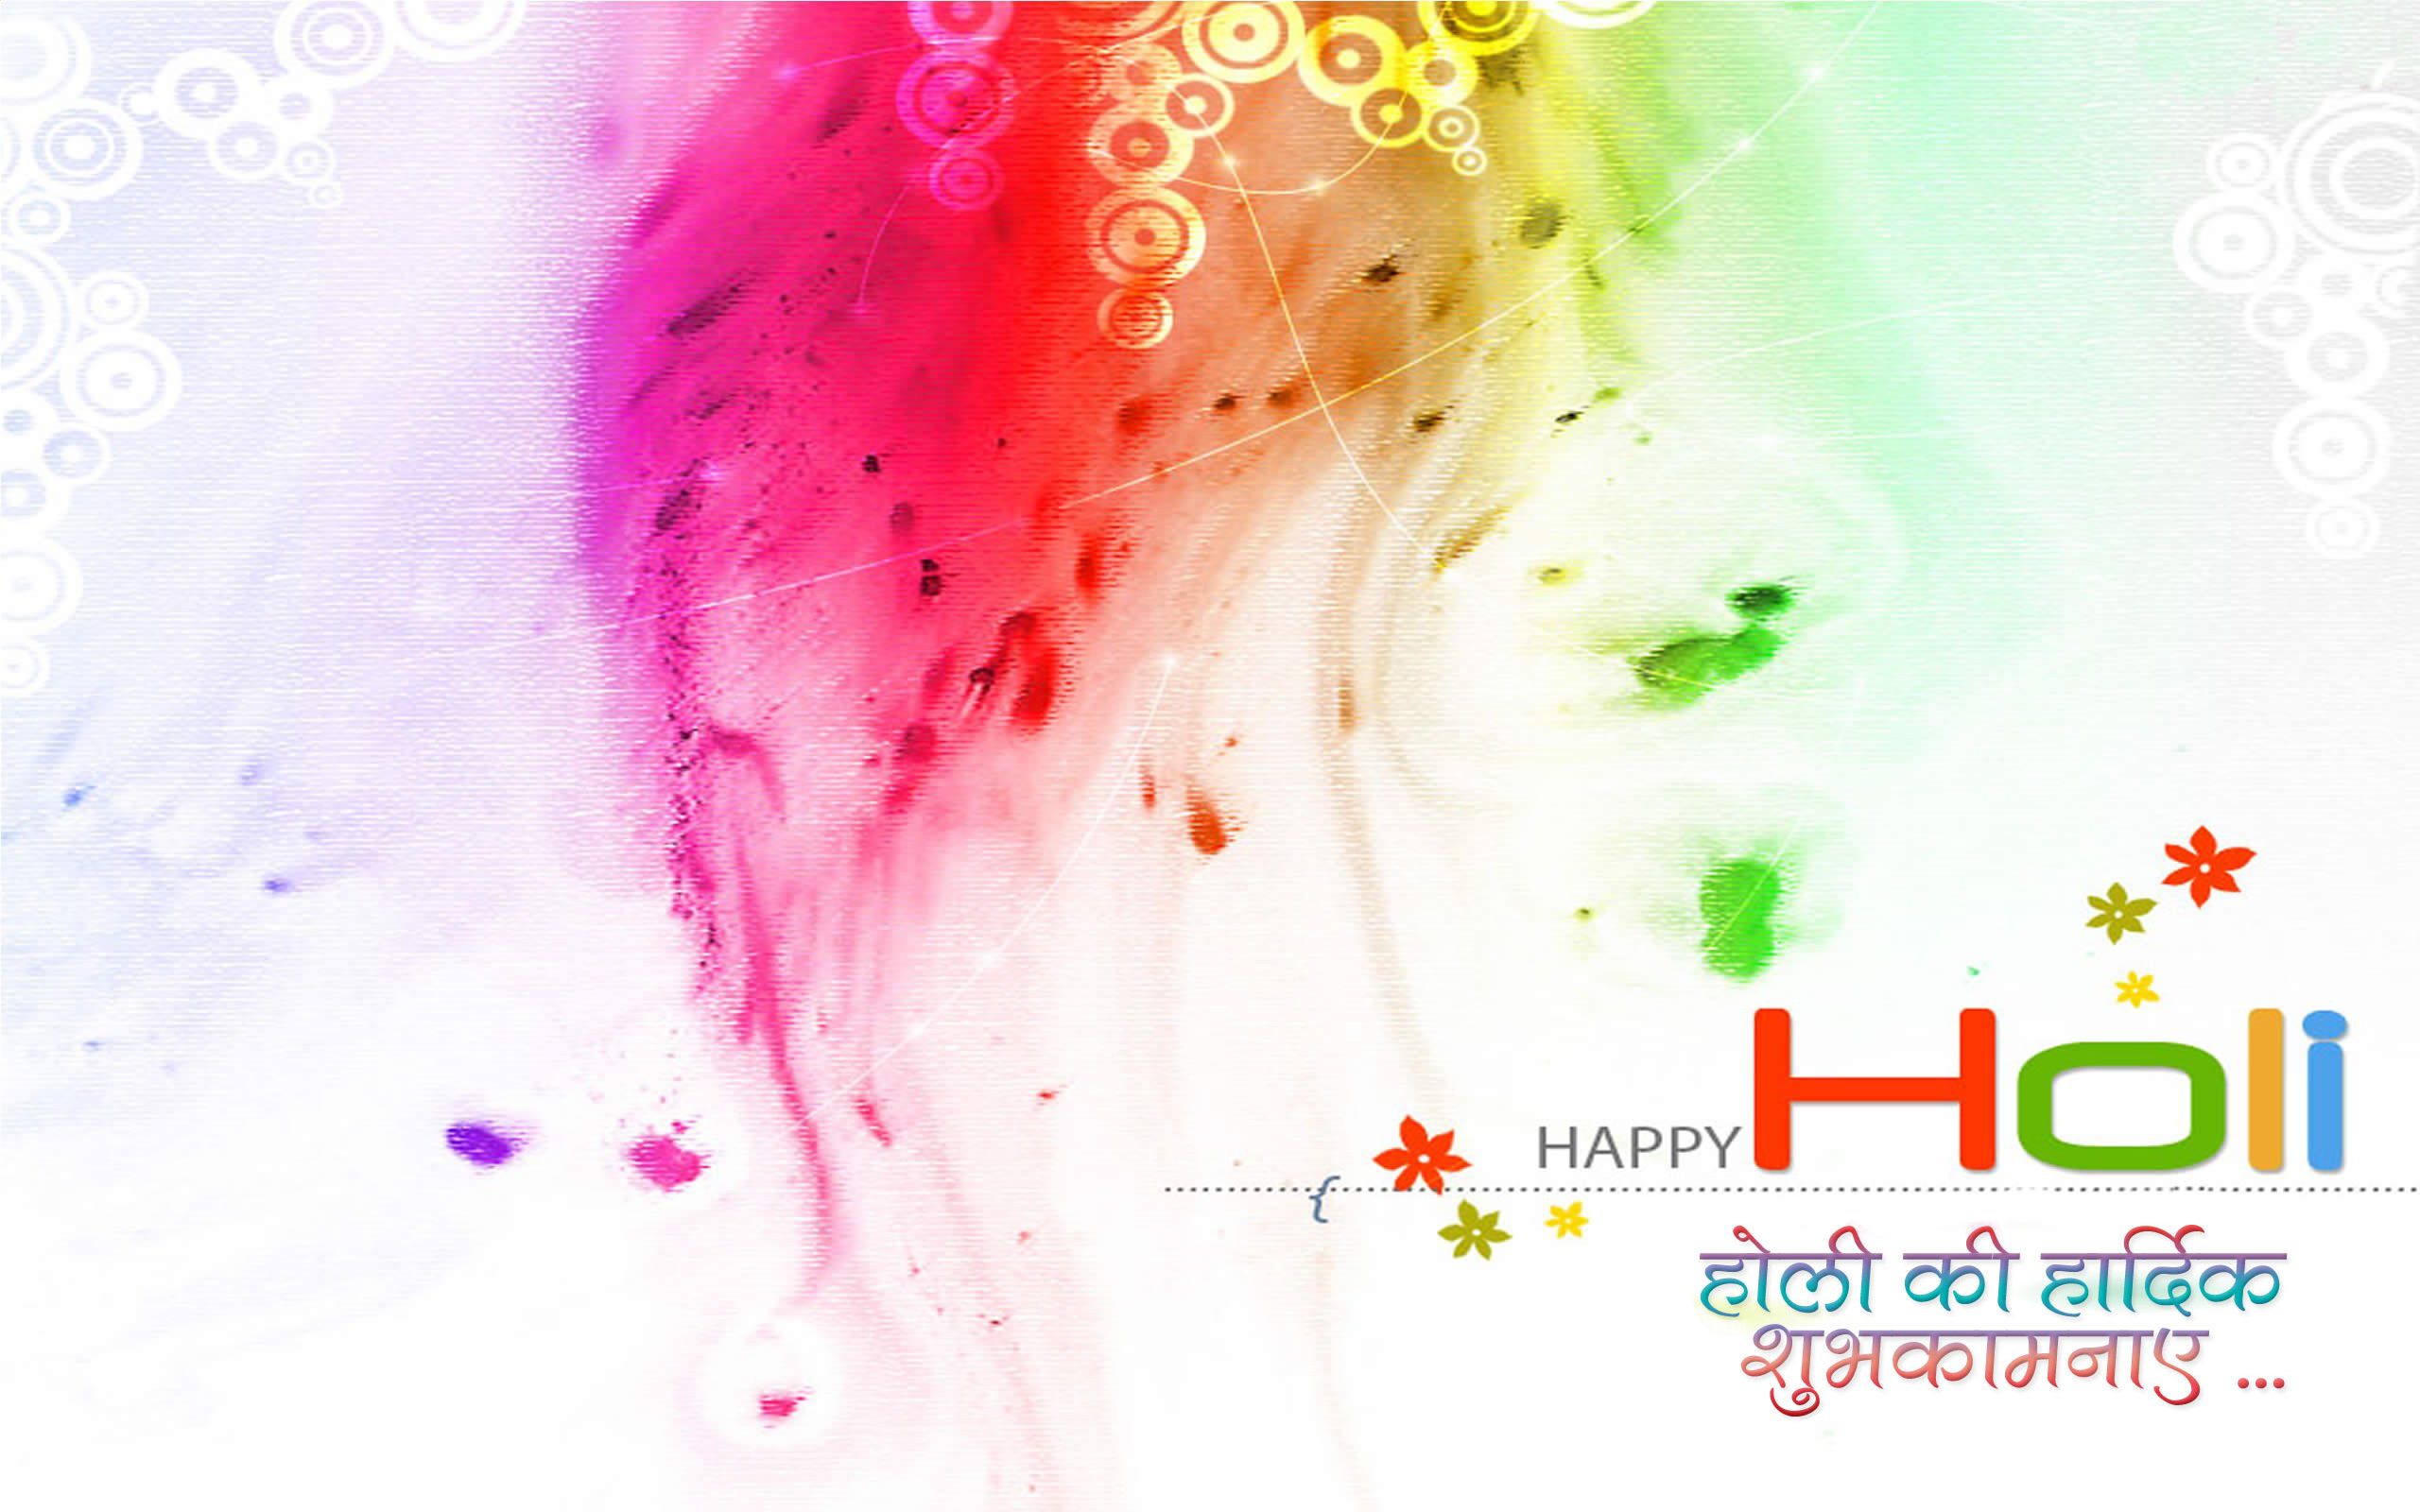 Happy Holi Image with Wishes in Hindi Text Wallpaper. Wallpaper Download. High Resolution Wallpaper